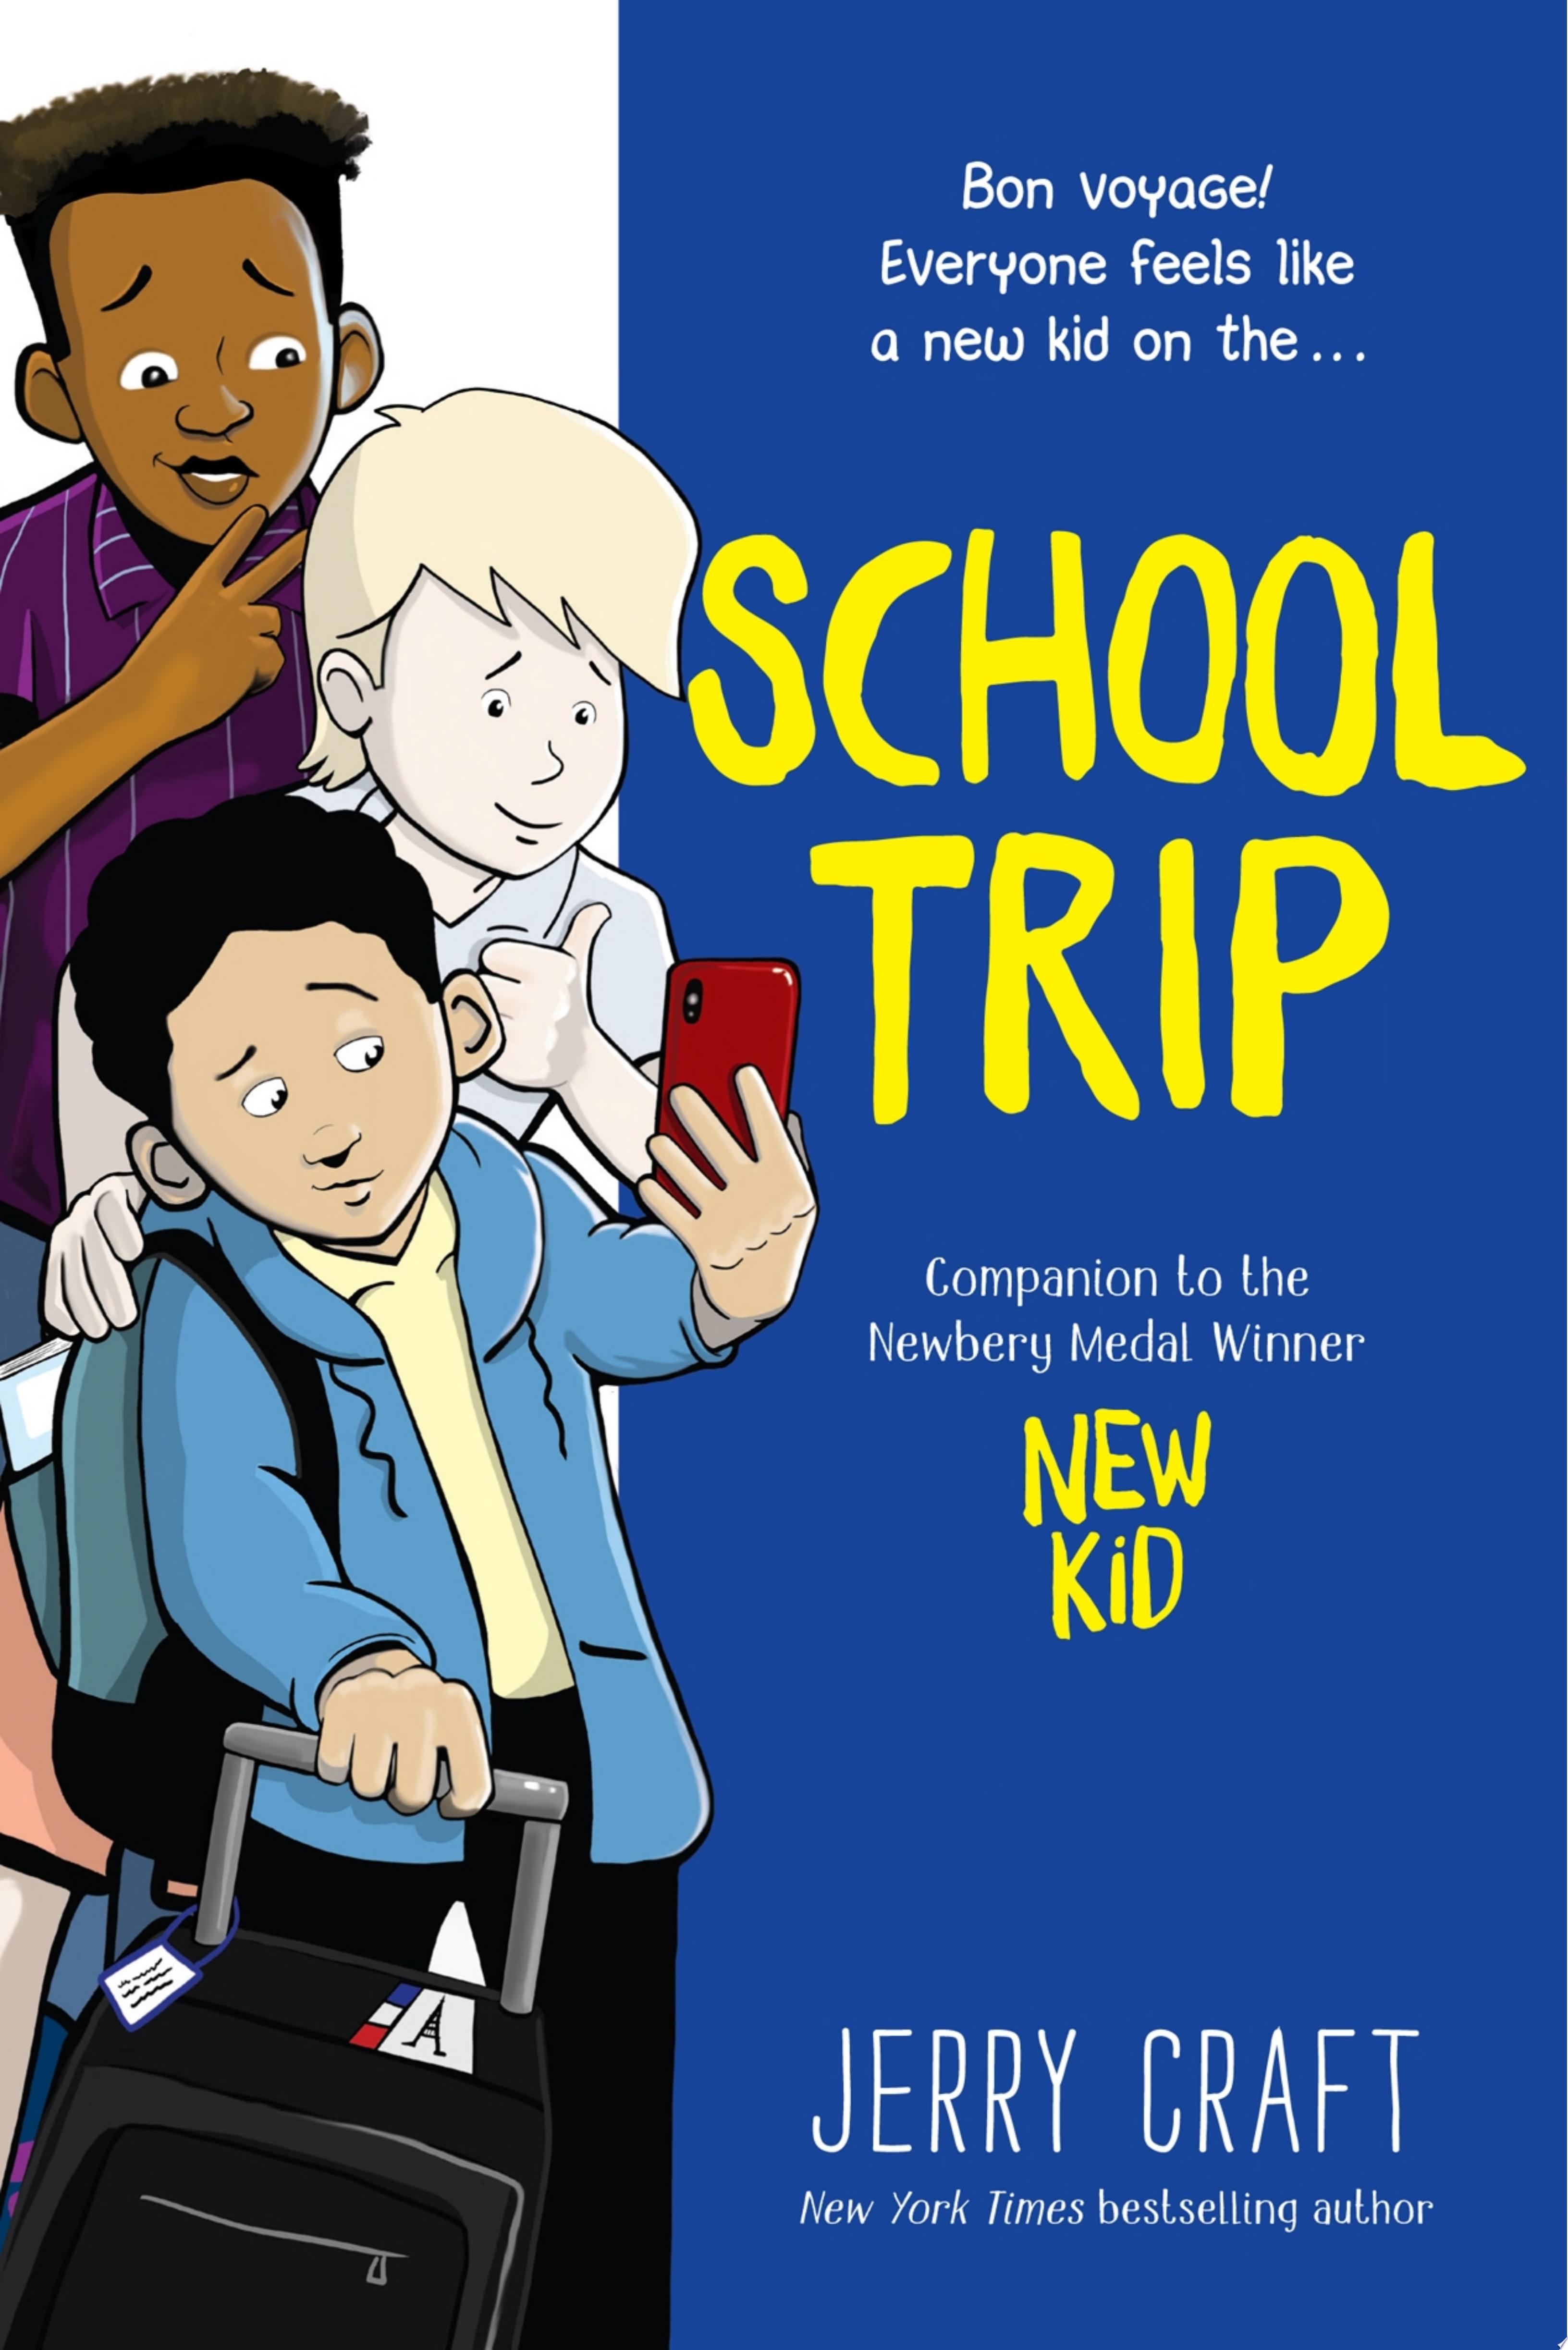 Image for "School Trip"